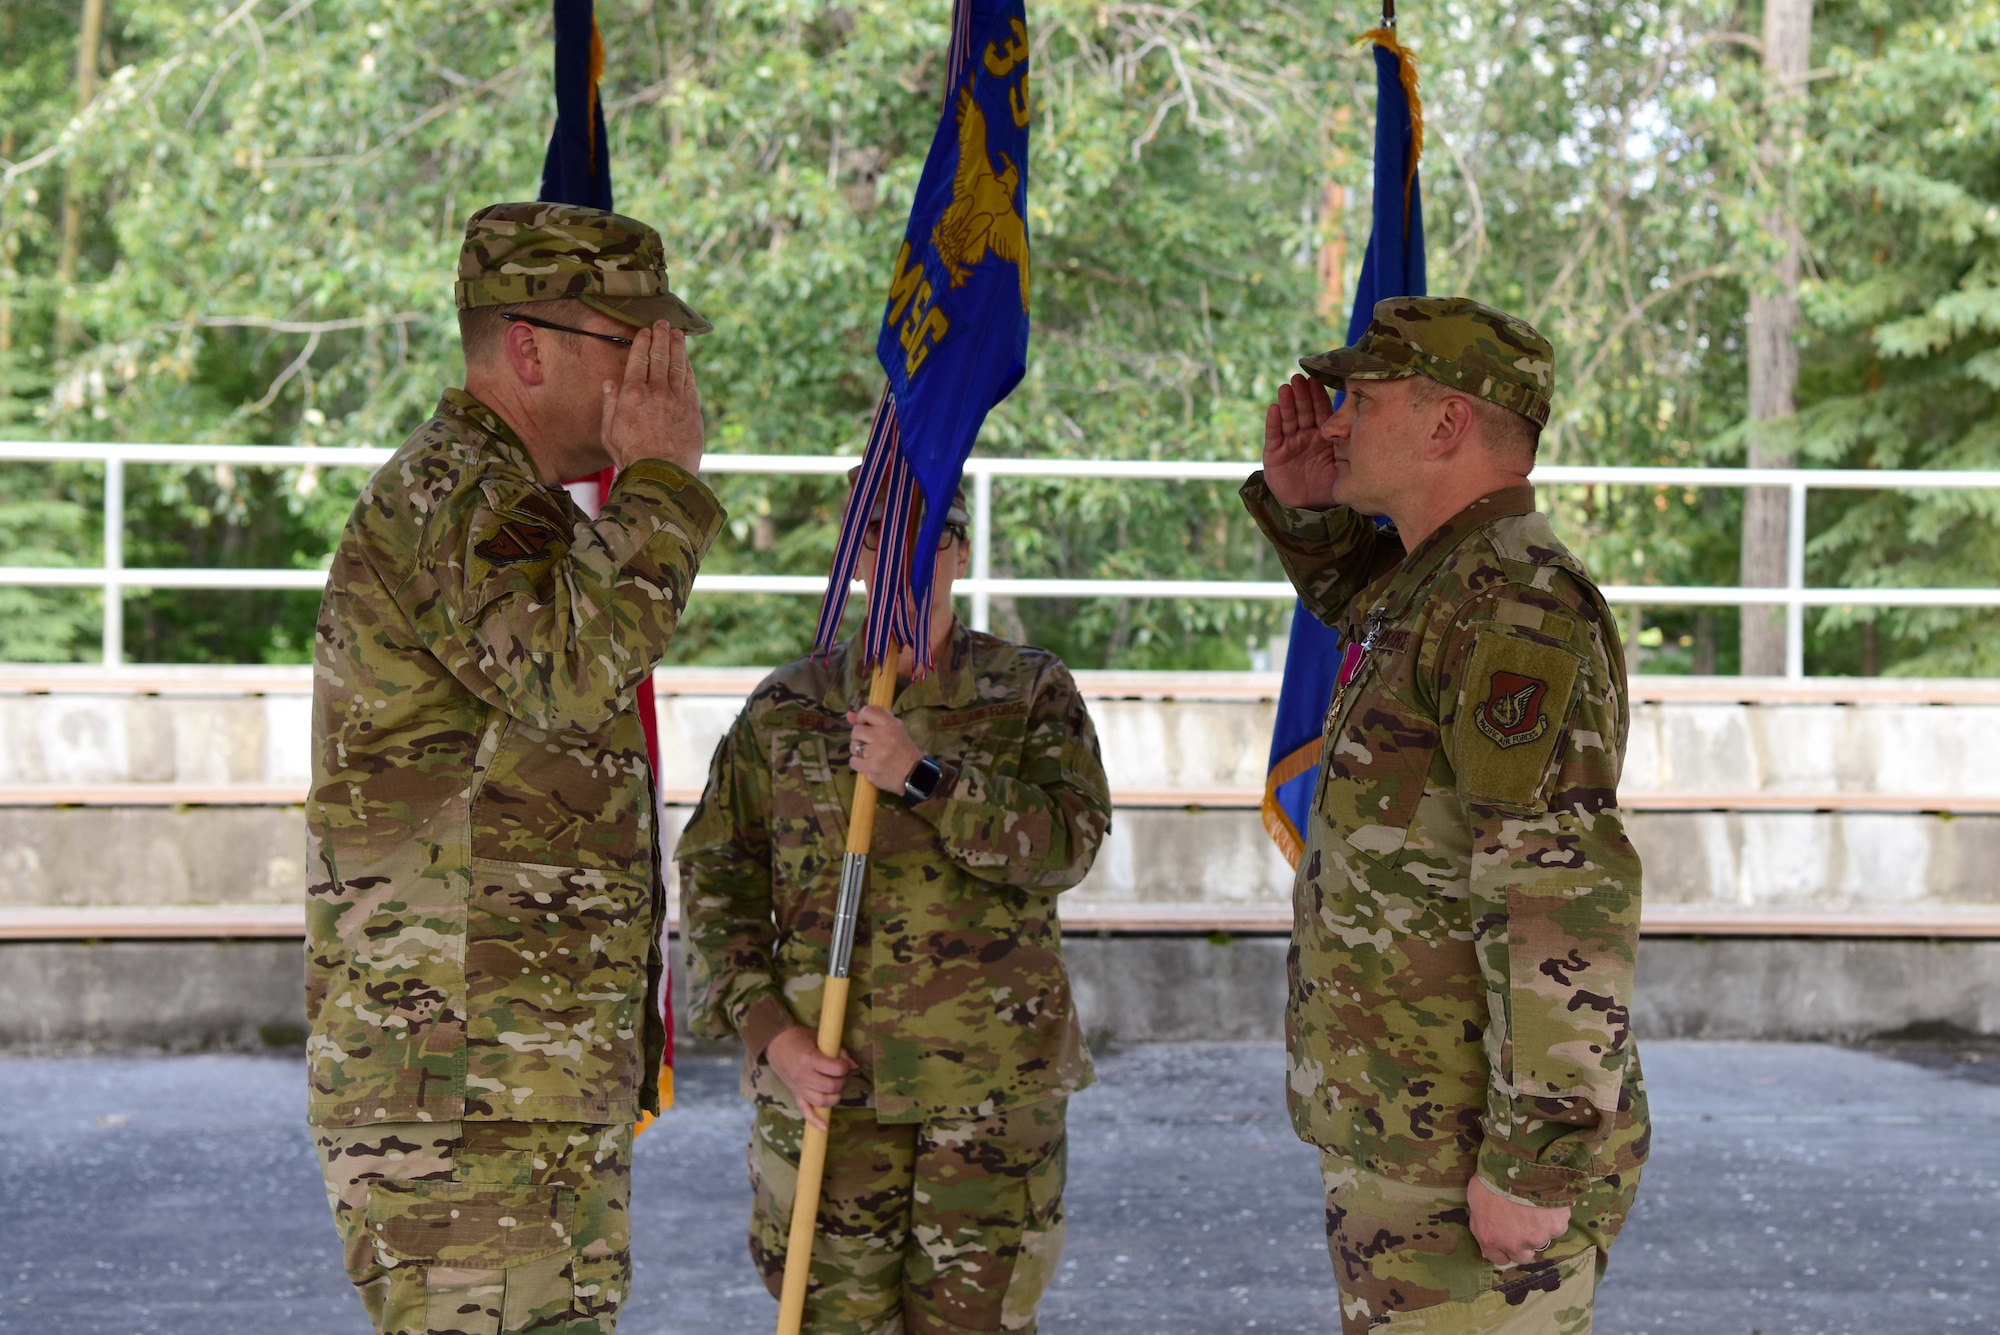 U.S. Air Force Col. Chad Bondurant (right) salutes Col. Shawn Anger, the 354th Fighter Wing commander, signifying his relinquishment of command of the 354th Mission Support Group during a ceremony, July 8, 2020.